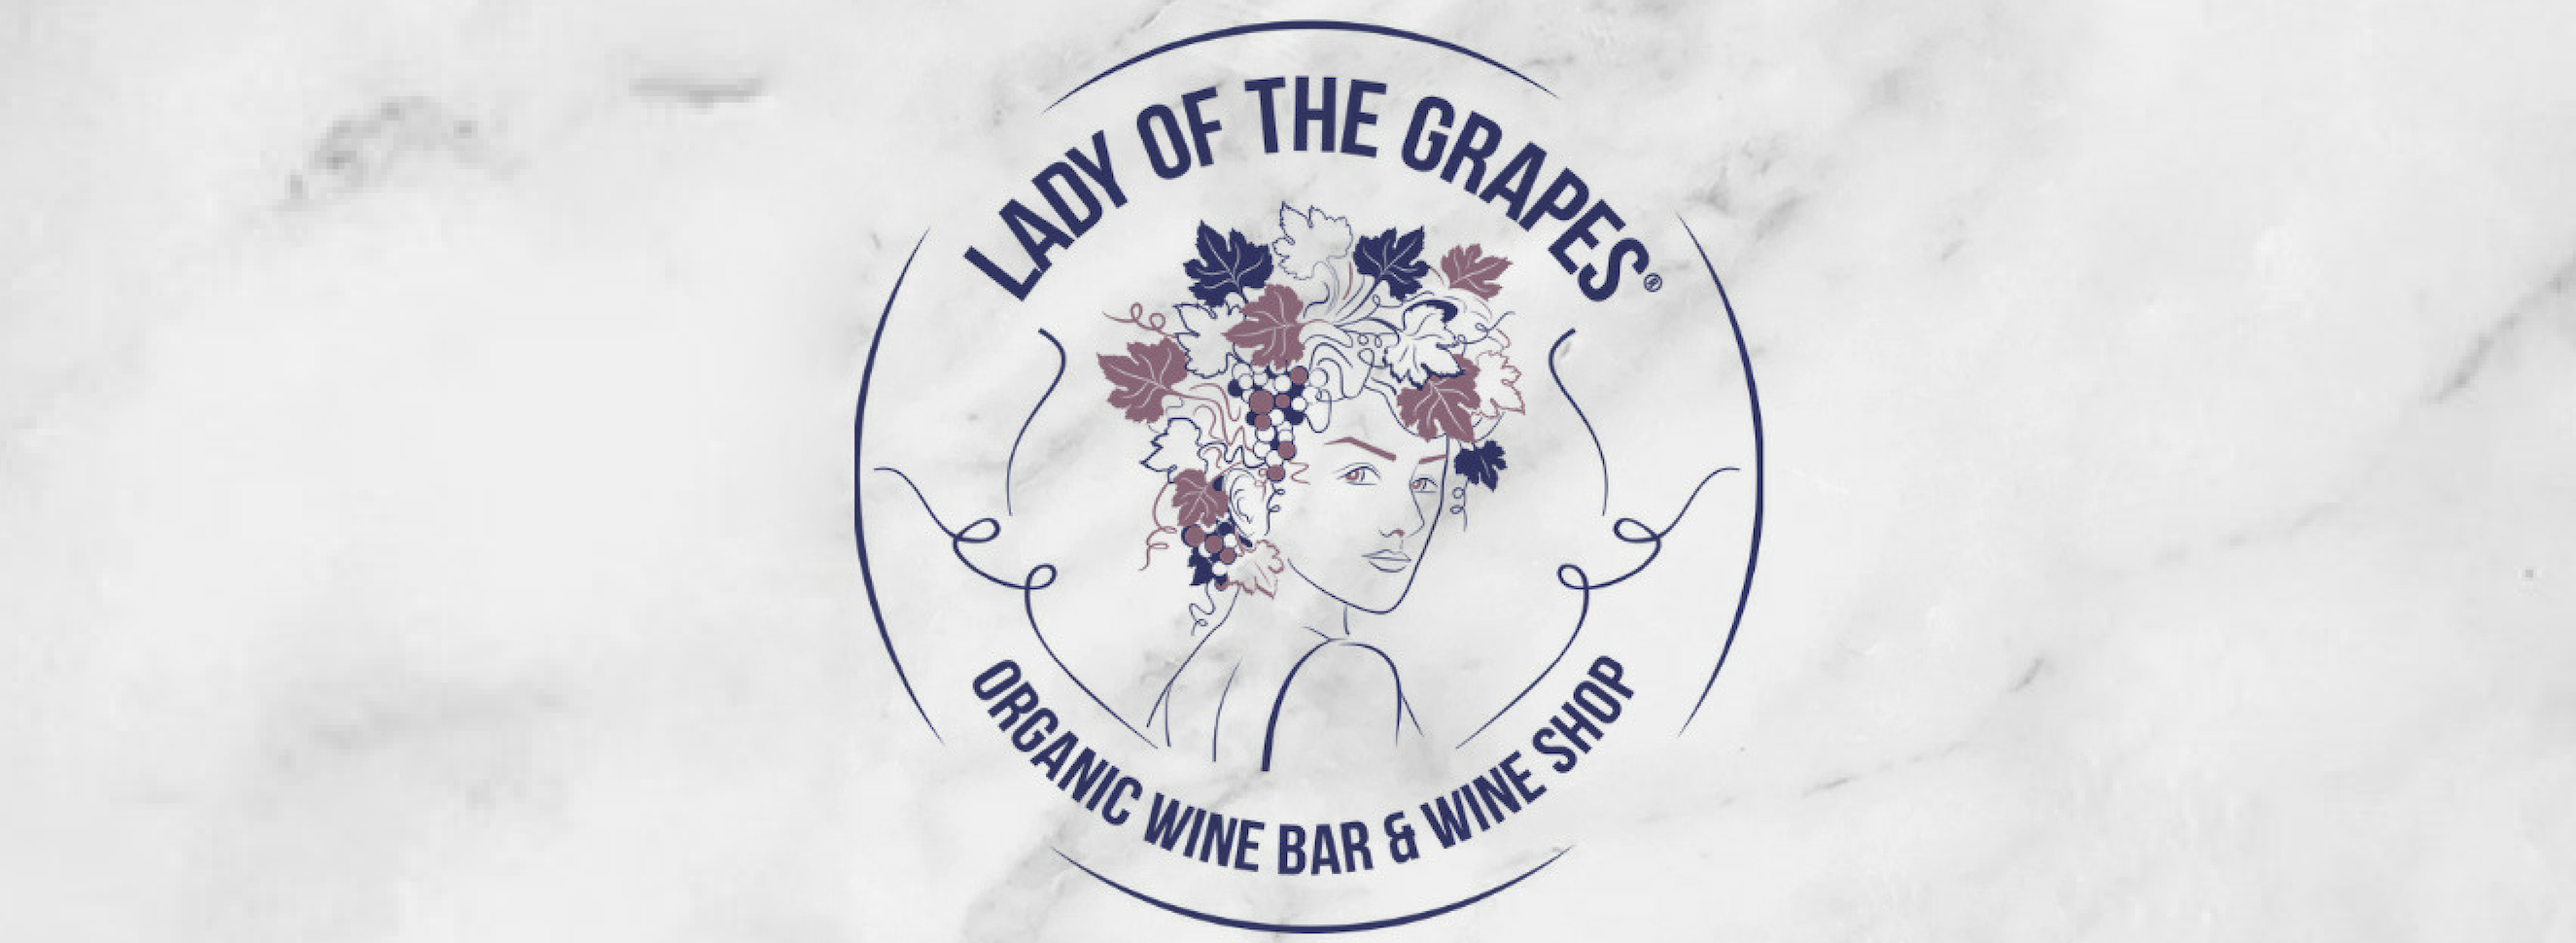 Celebrate International Women’s Day with Lady of the Grapes